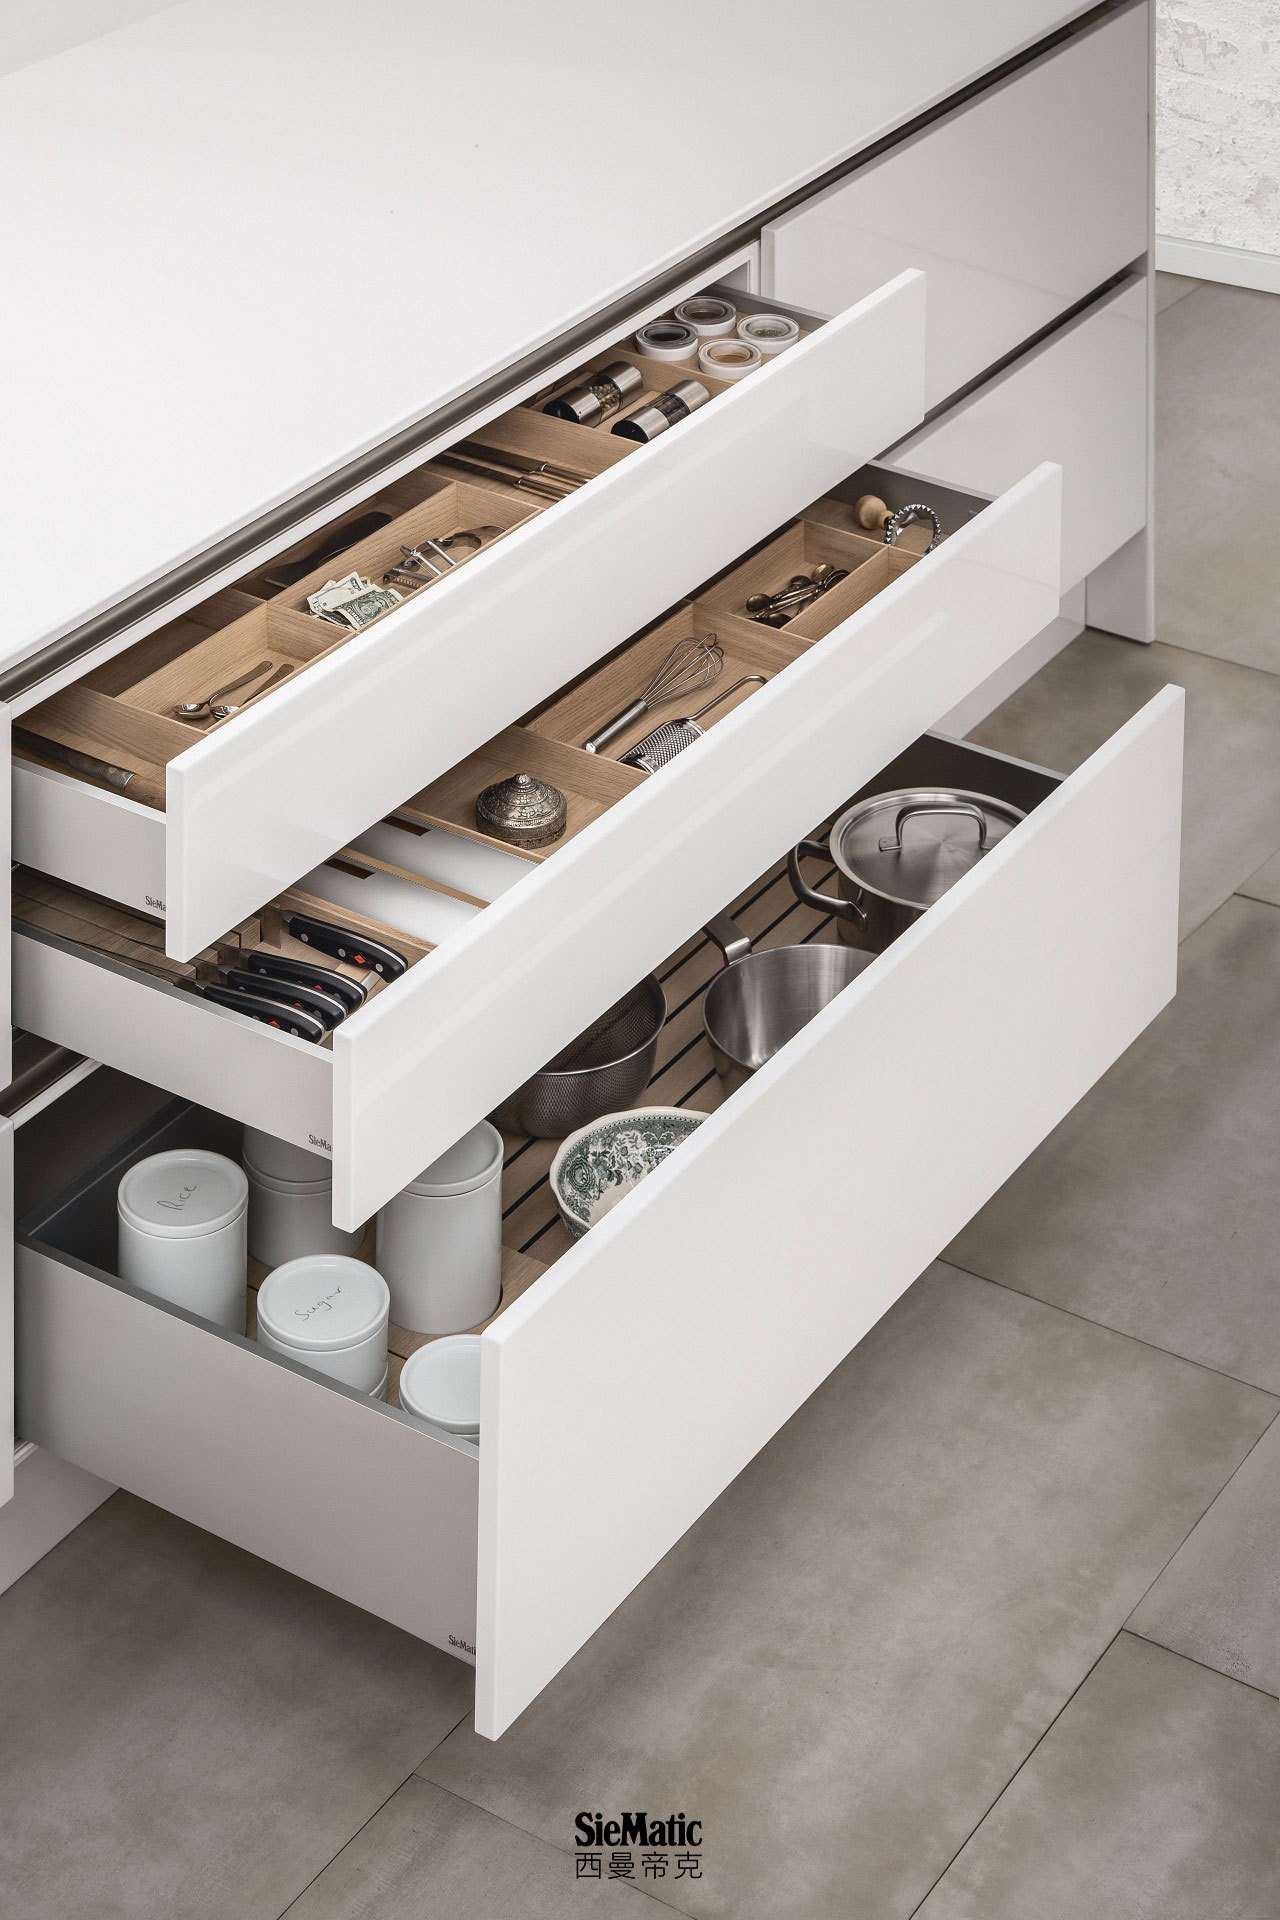 SieMatic kitchen interior accessories for drawers and pull-outs offer versatile organization options.